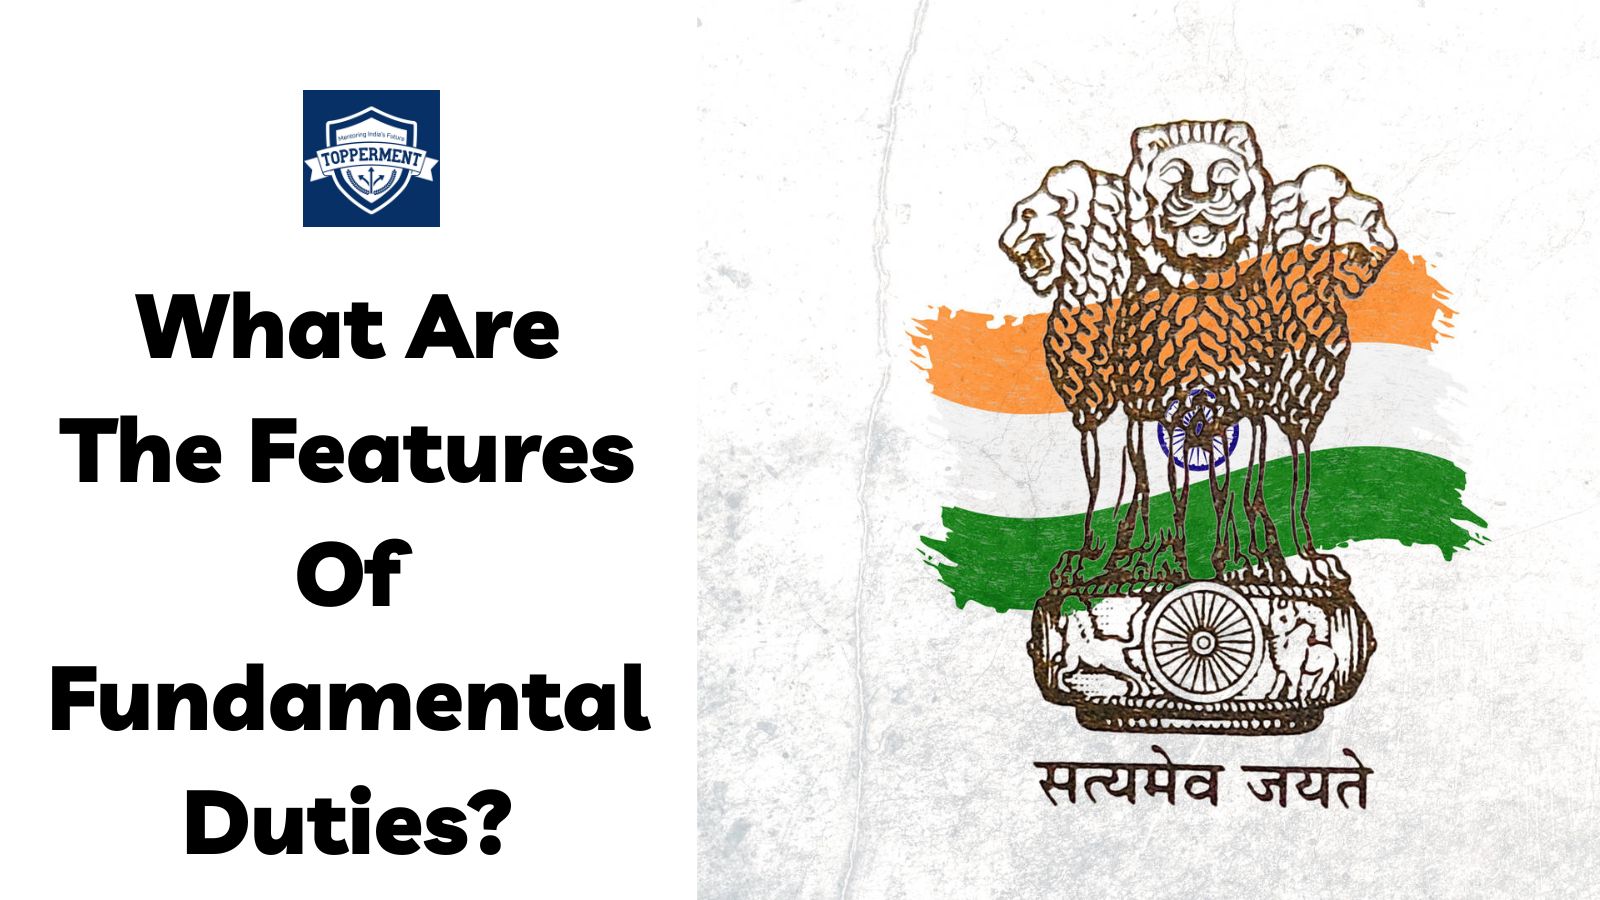 What Are the Features of Fundamental Duties? | Best UPSC IAS Coaching For Mentorship And Guidance